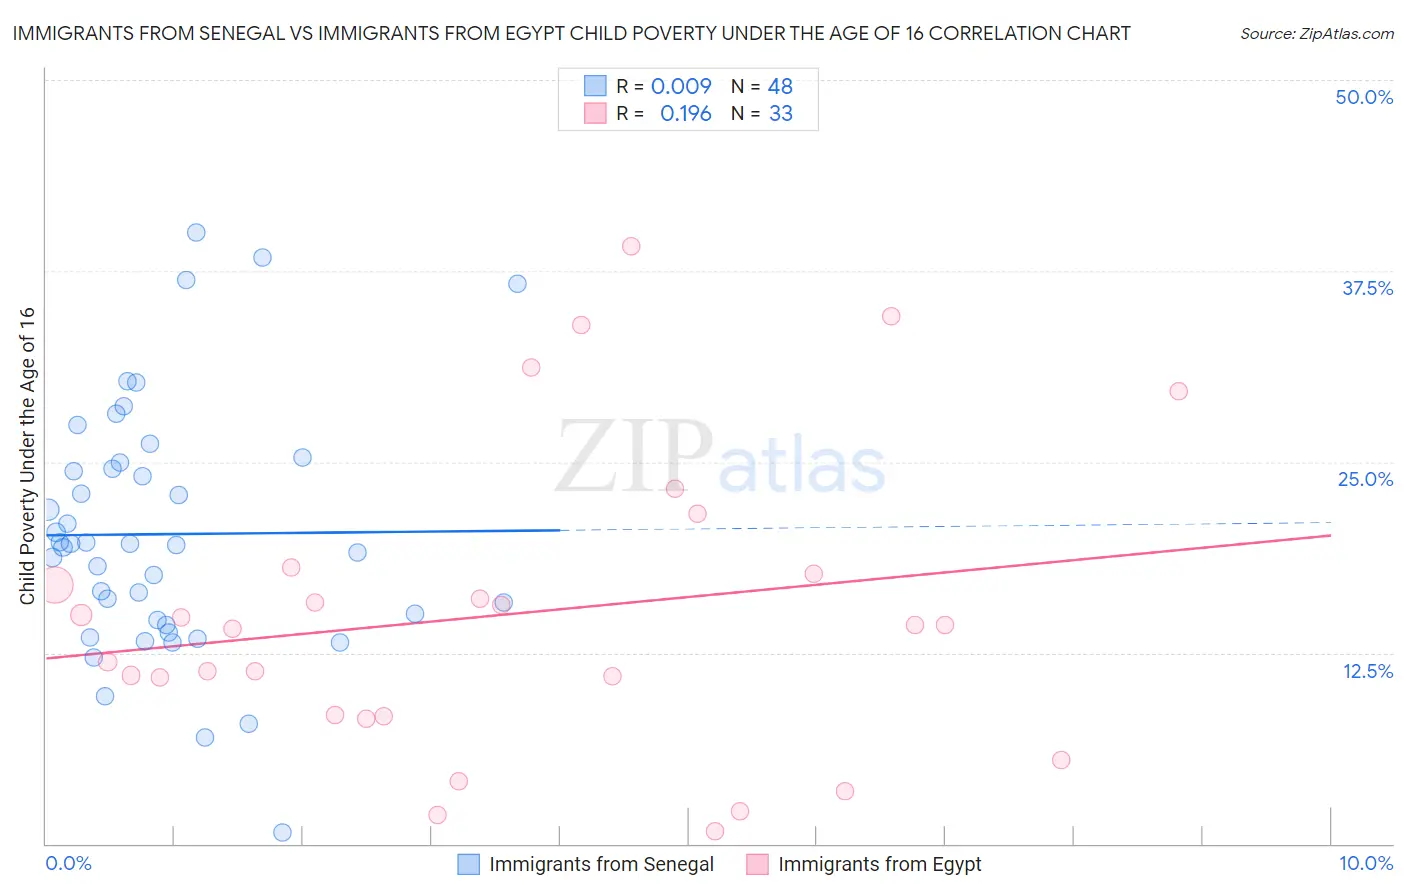 Immigrants from Senegal vs Immigrants from Egypt Child Poverty Under the Age of 16